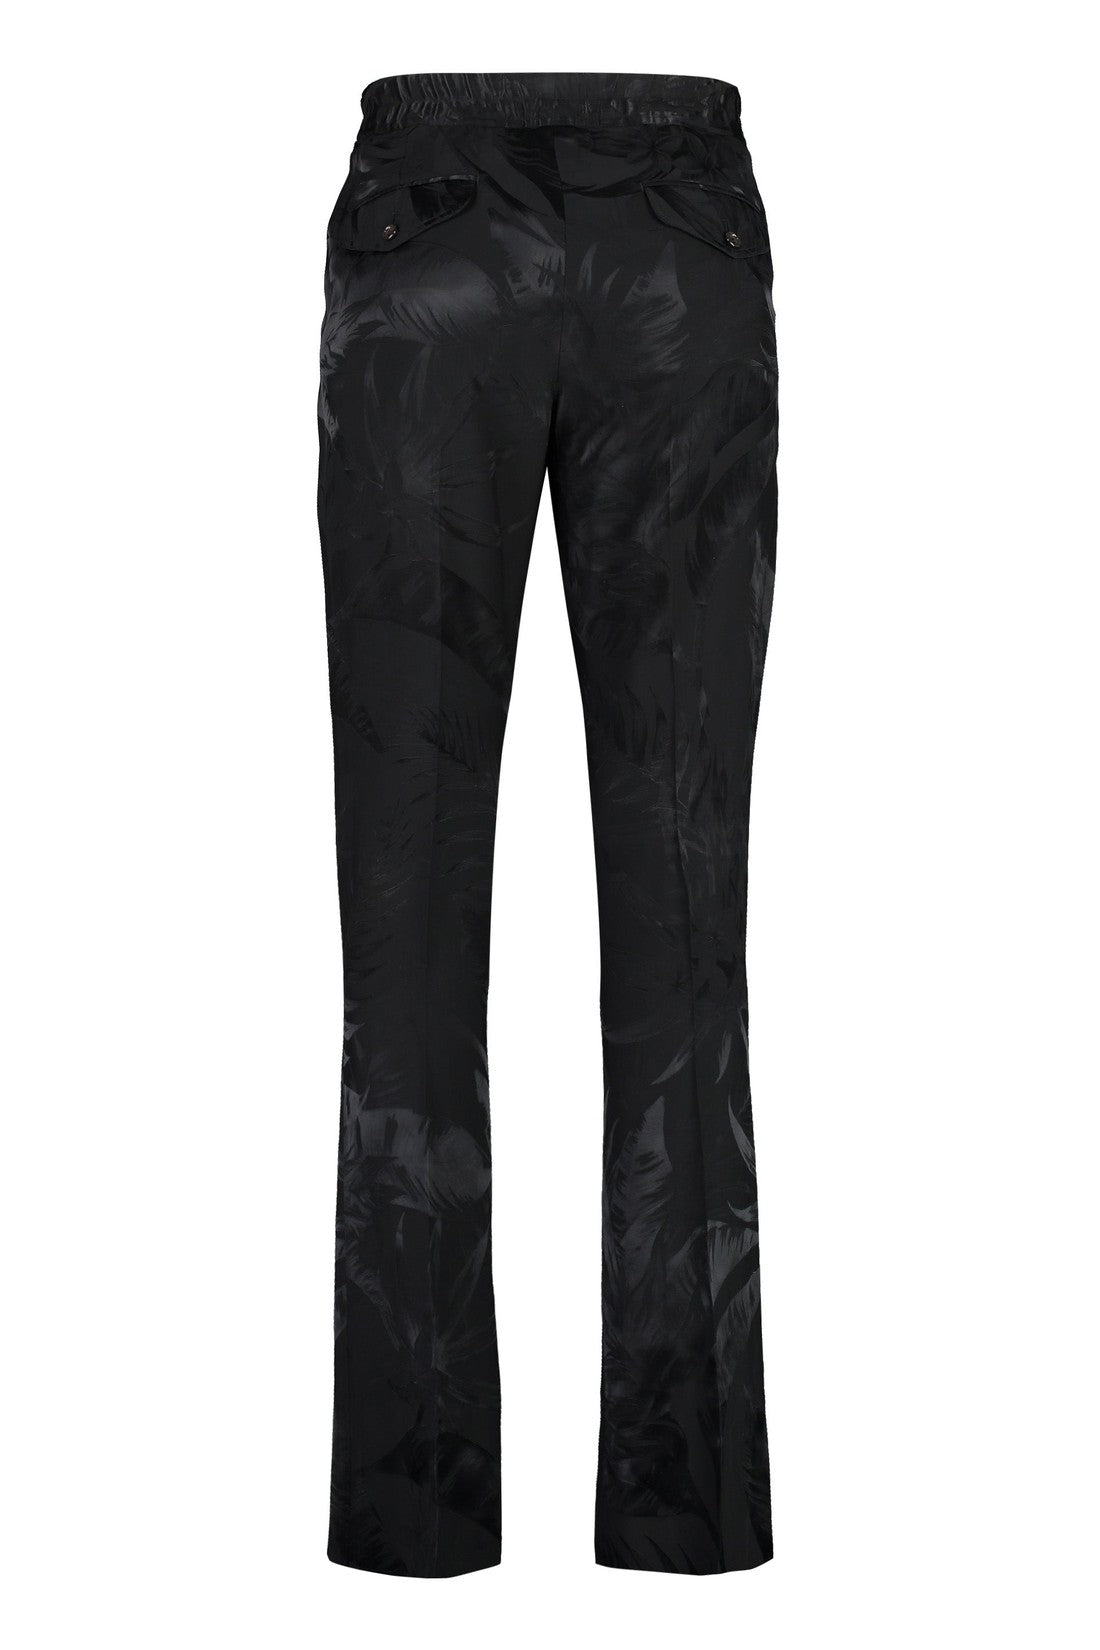 Tom Ford-OUTLET-SALE-Viscose trousers-ARCHIVIST